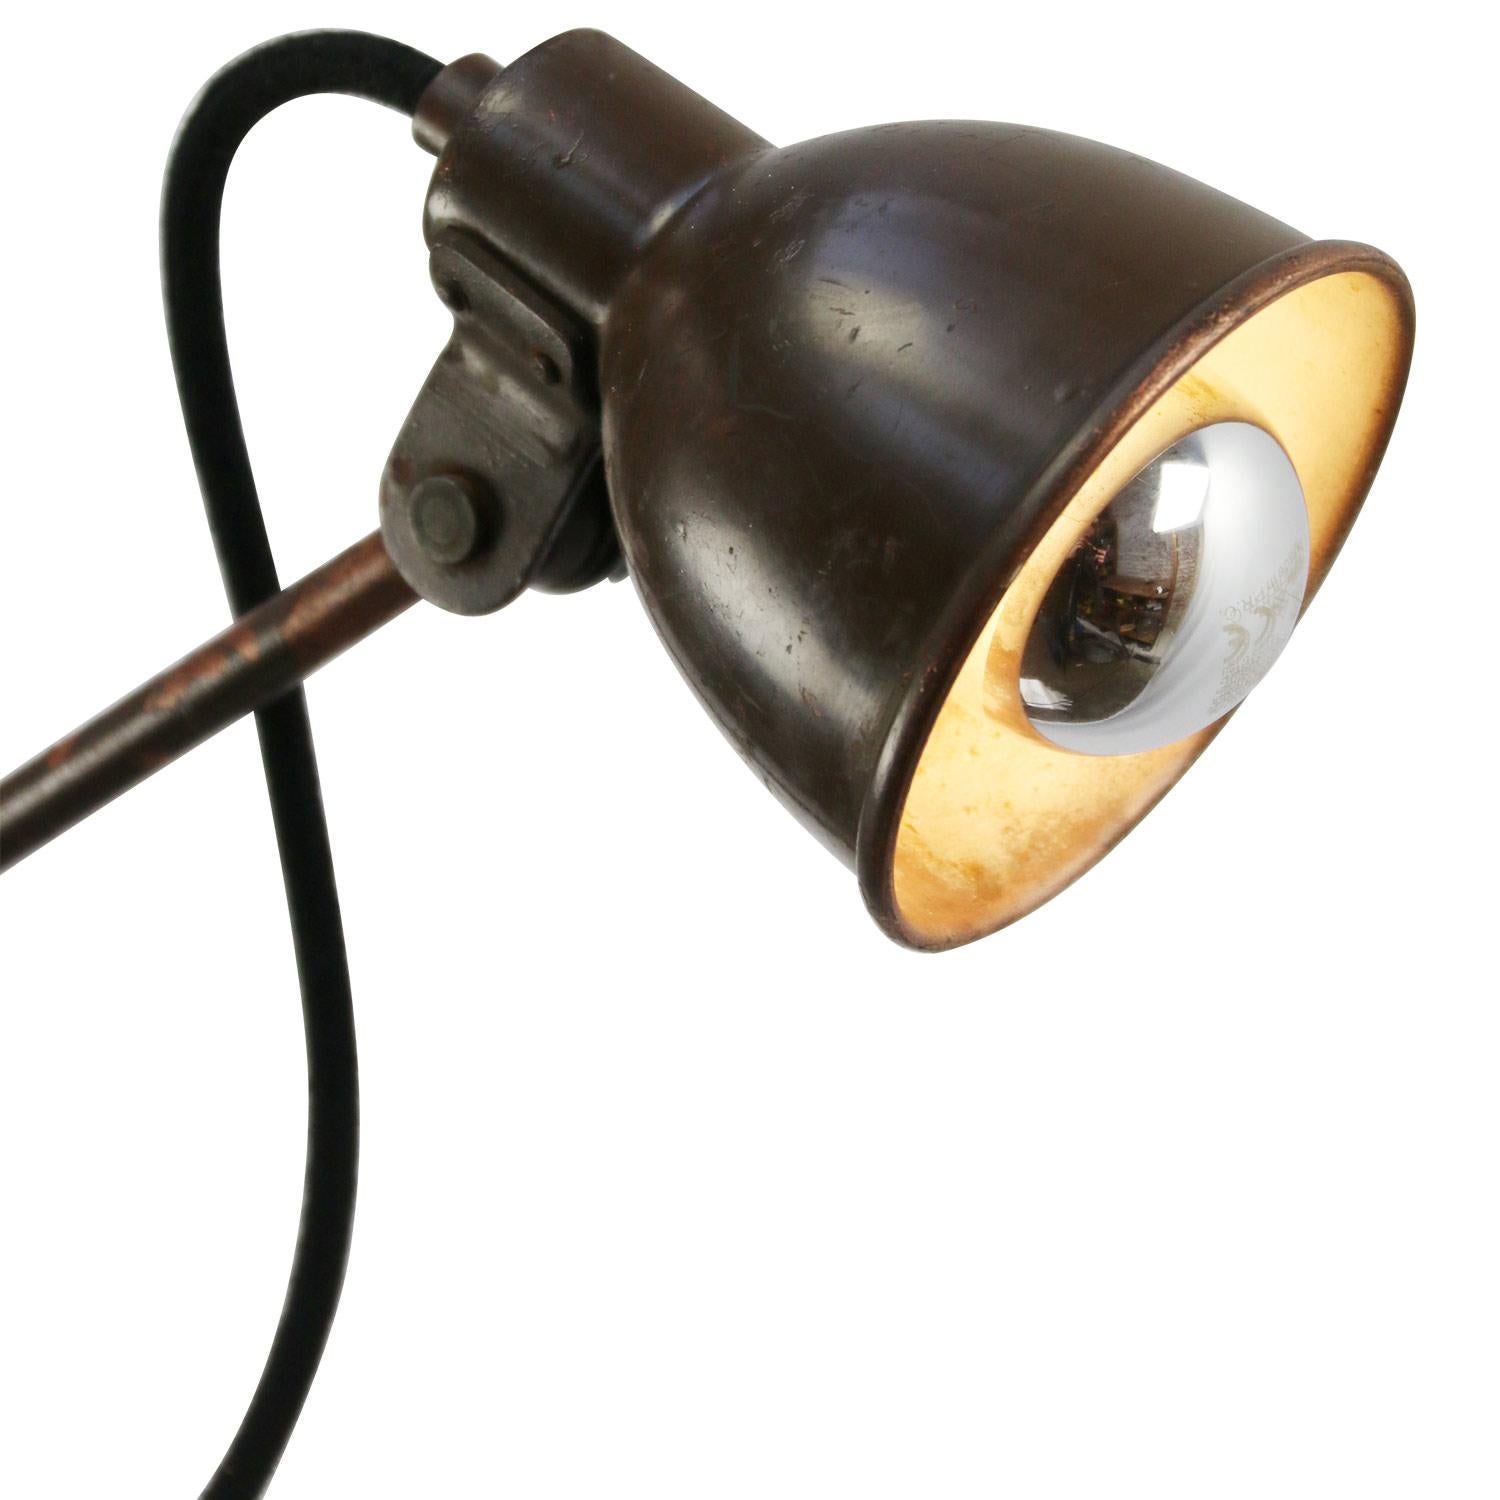 Brown painted copper wall lights with switch 
Adjustable in height
Diameter shade 10 cm / 3.94 inch.

E14

E14 bulb holder. Priced per individual item. All lamps have been made suitable by international standards for incandescent light bulbs,